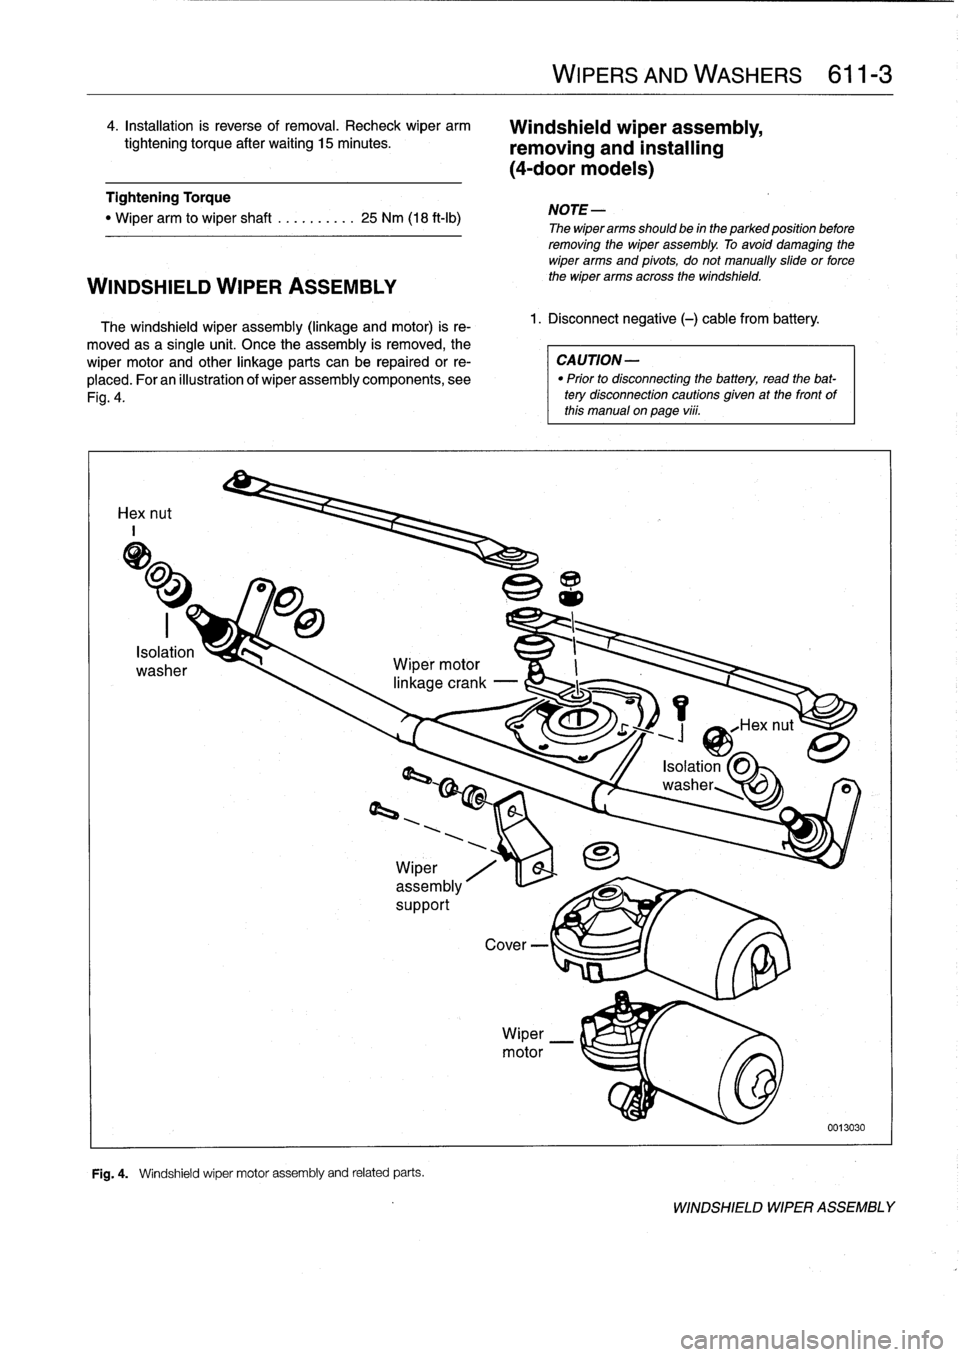 BMW 323i 1997 E36 Workshop Manual 
4
.
Installation
is
reverse
of
removal
.
Recheck
wiper
arm

tightening
torque
after
waiting
15minutes
.

Tightening
Torque

"
Wiper
arm
to
wiper
shaft
..........
25
Nm
(18
ft-Ib)

WINDSHIELD
WIPER
AS